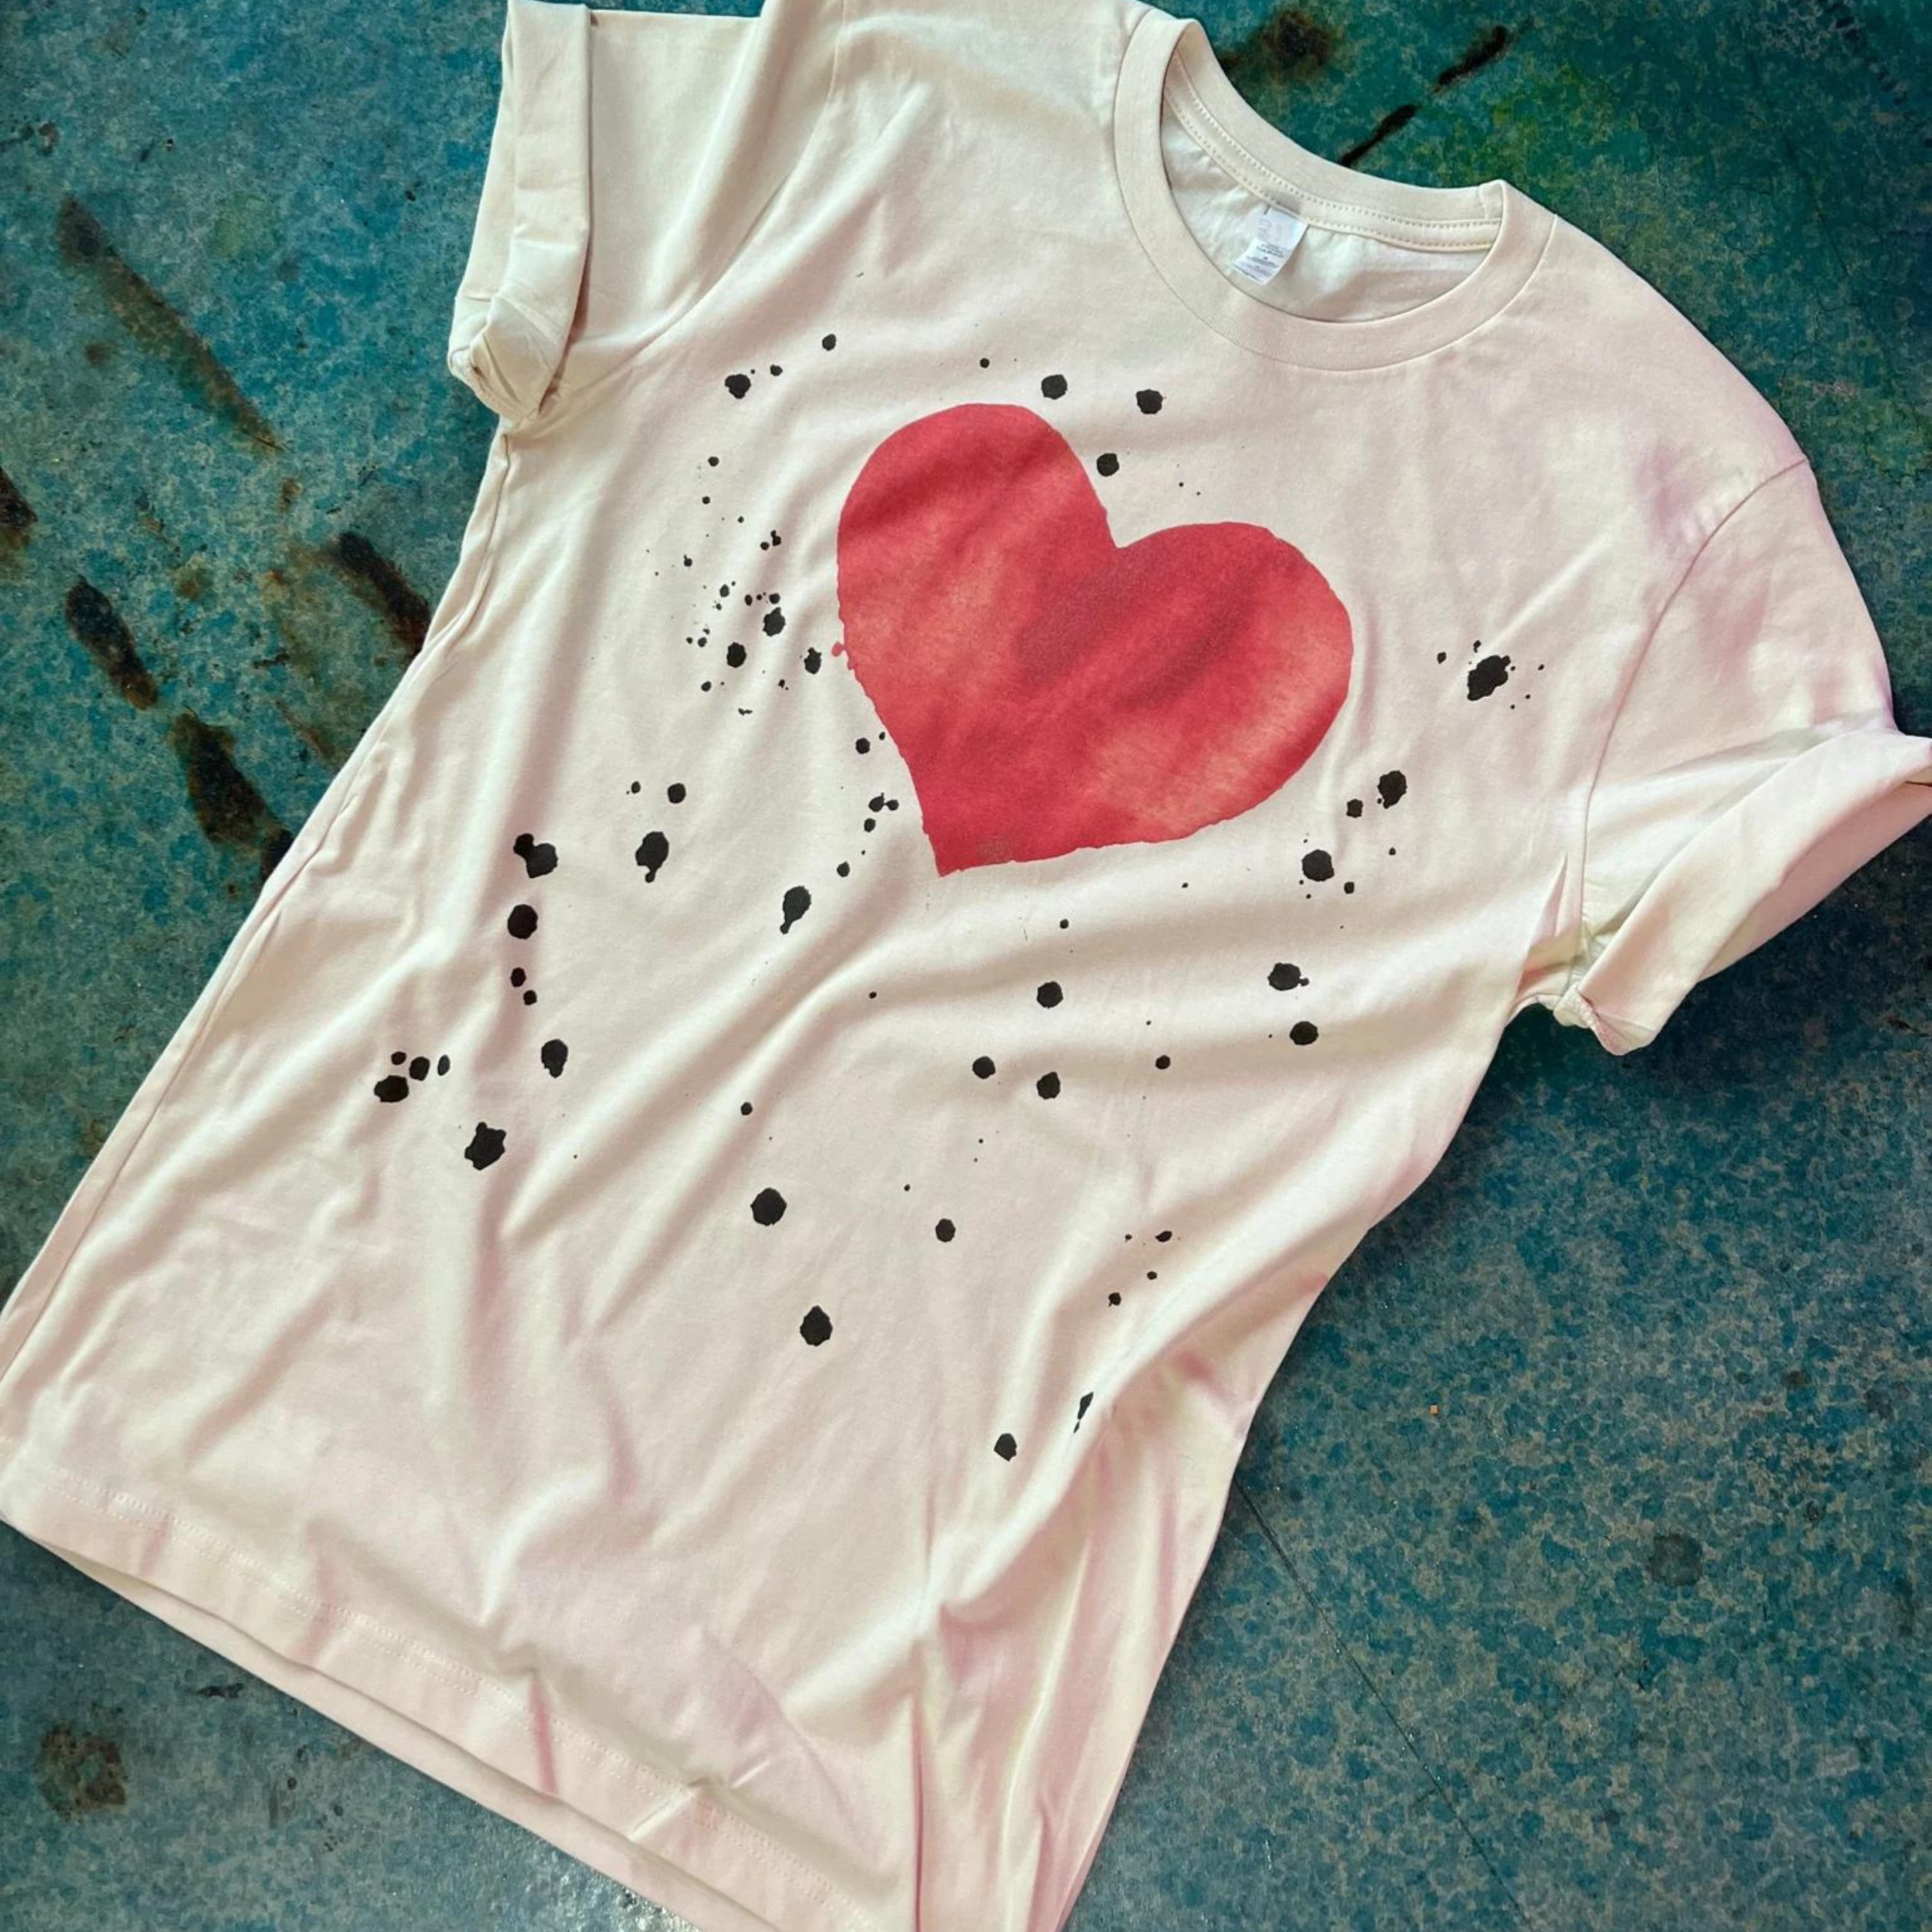 This cream tee is shown as a flatlay on a turquoise background. The graphic is a red heart with black paint splattered randomly on the front. This tee is also pictured with rolled sleeves. 